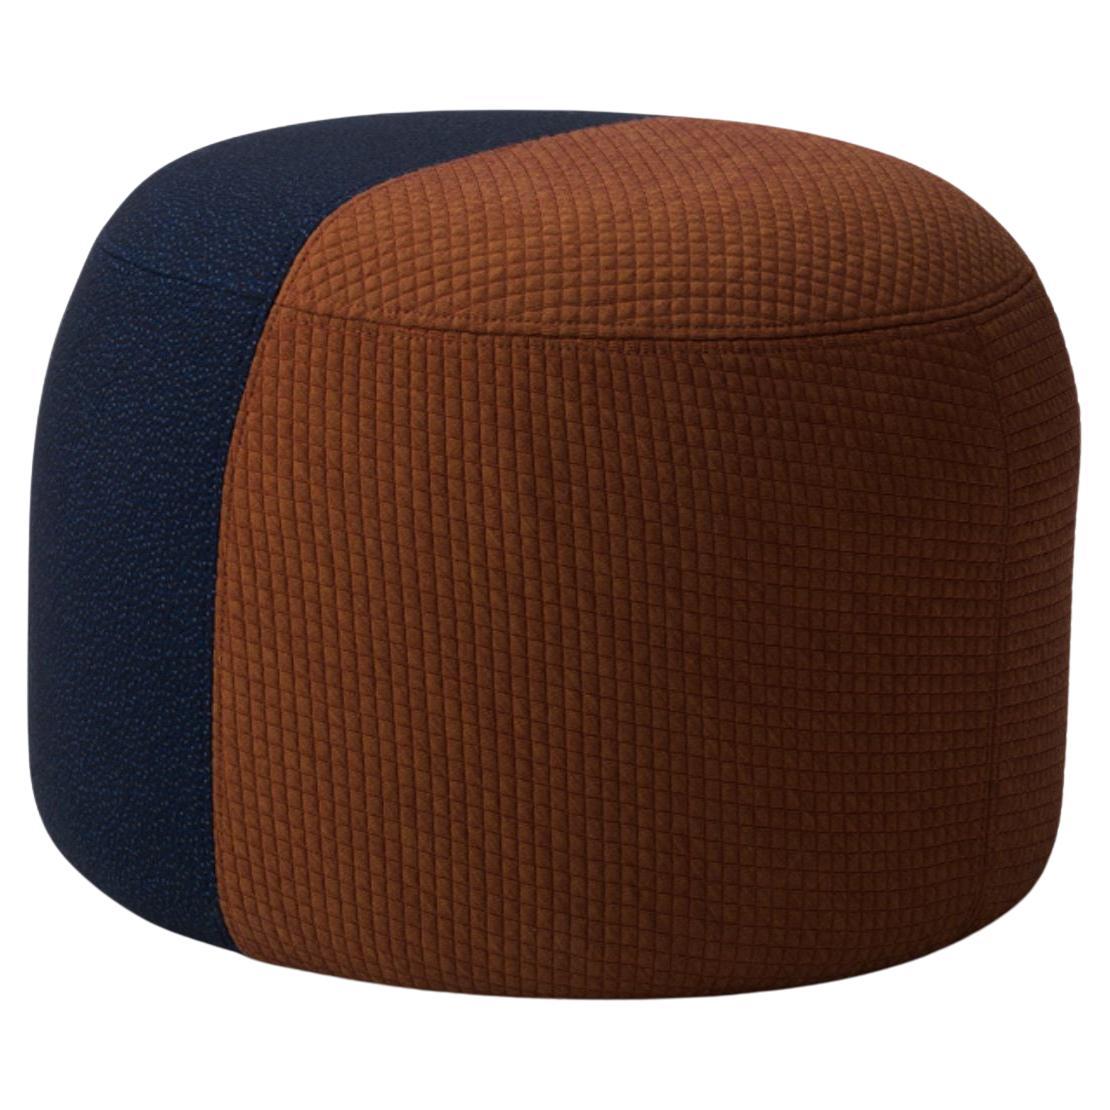 Dainty Pouf Mosaic Sprinkles Rusty Midnight Blue by Warm Nordic For Sale